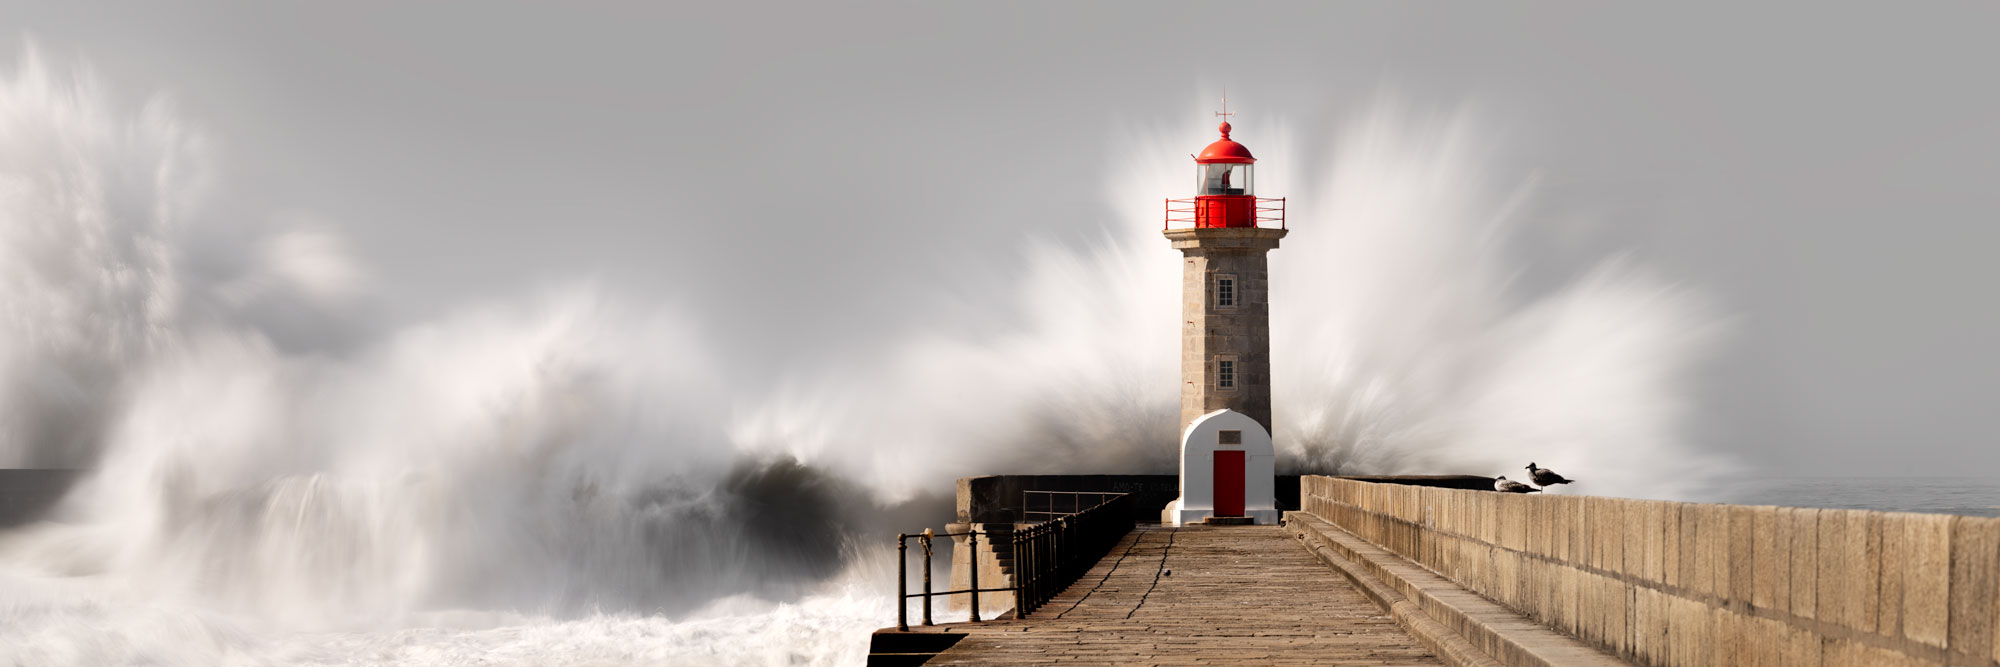 Panorama of a lighthouse in Portugal as waves crash over it